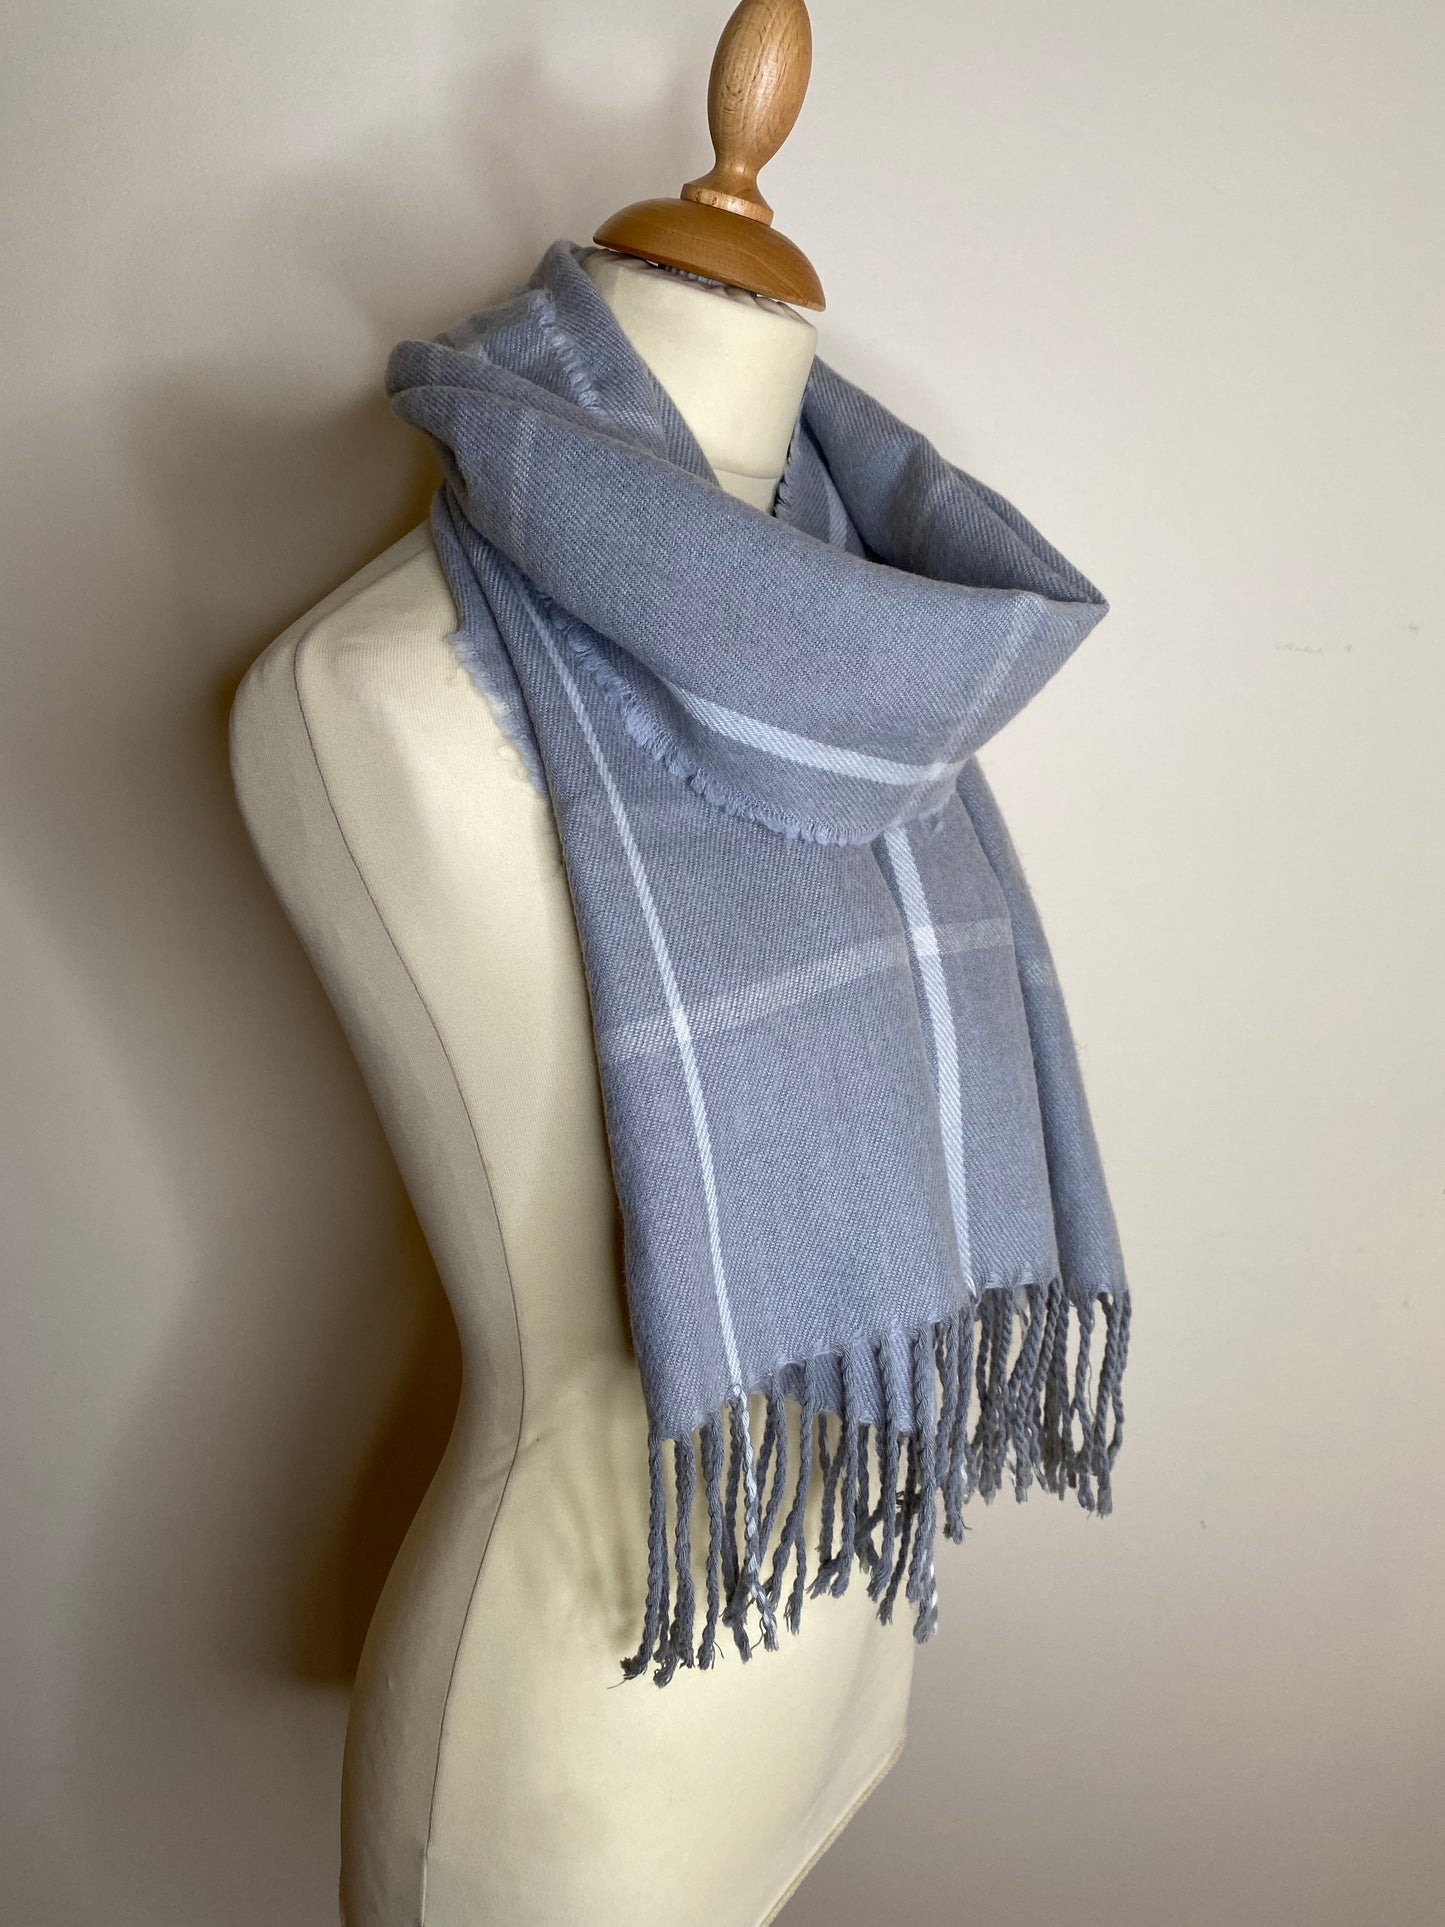 M&S - grey check soft wool blend long oversized scarf